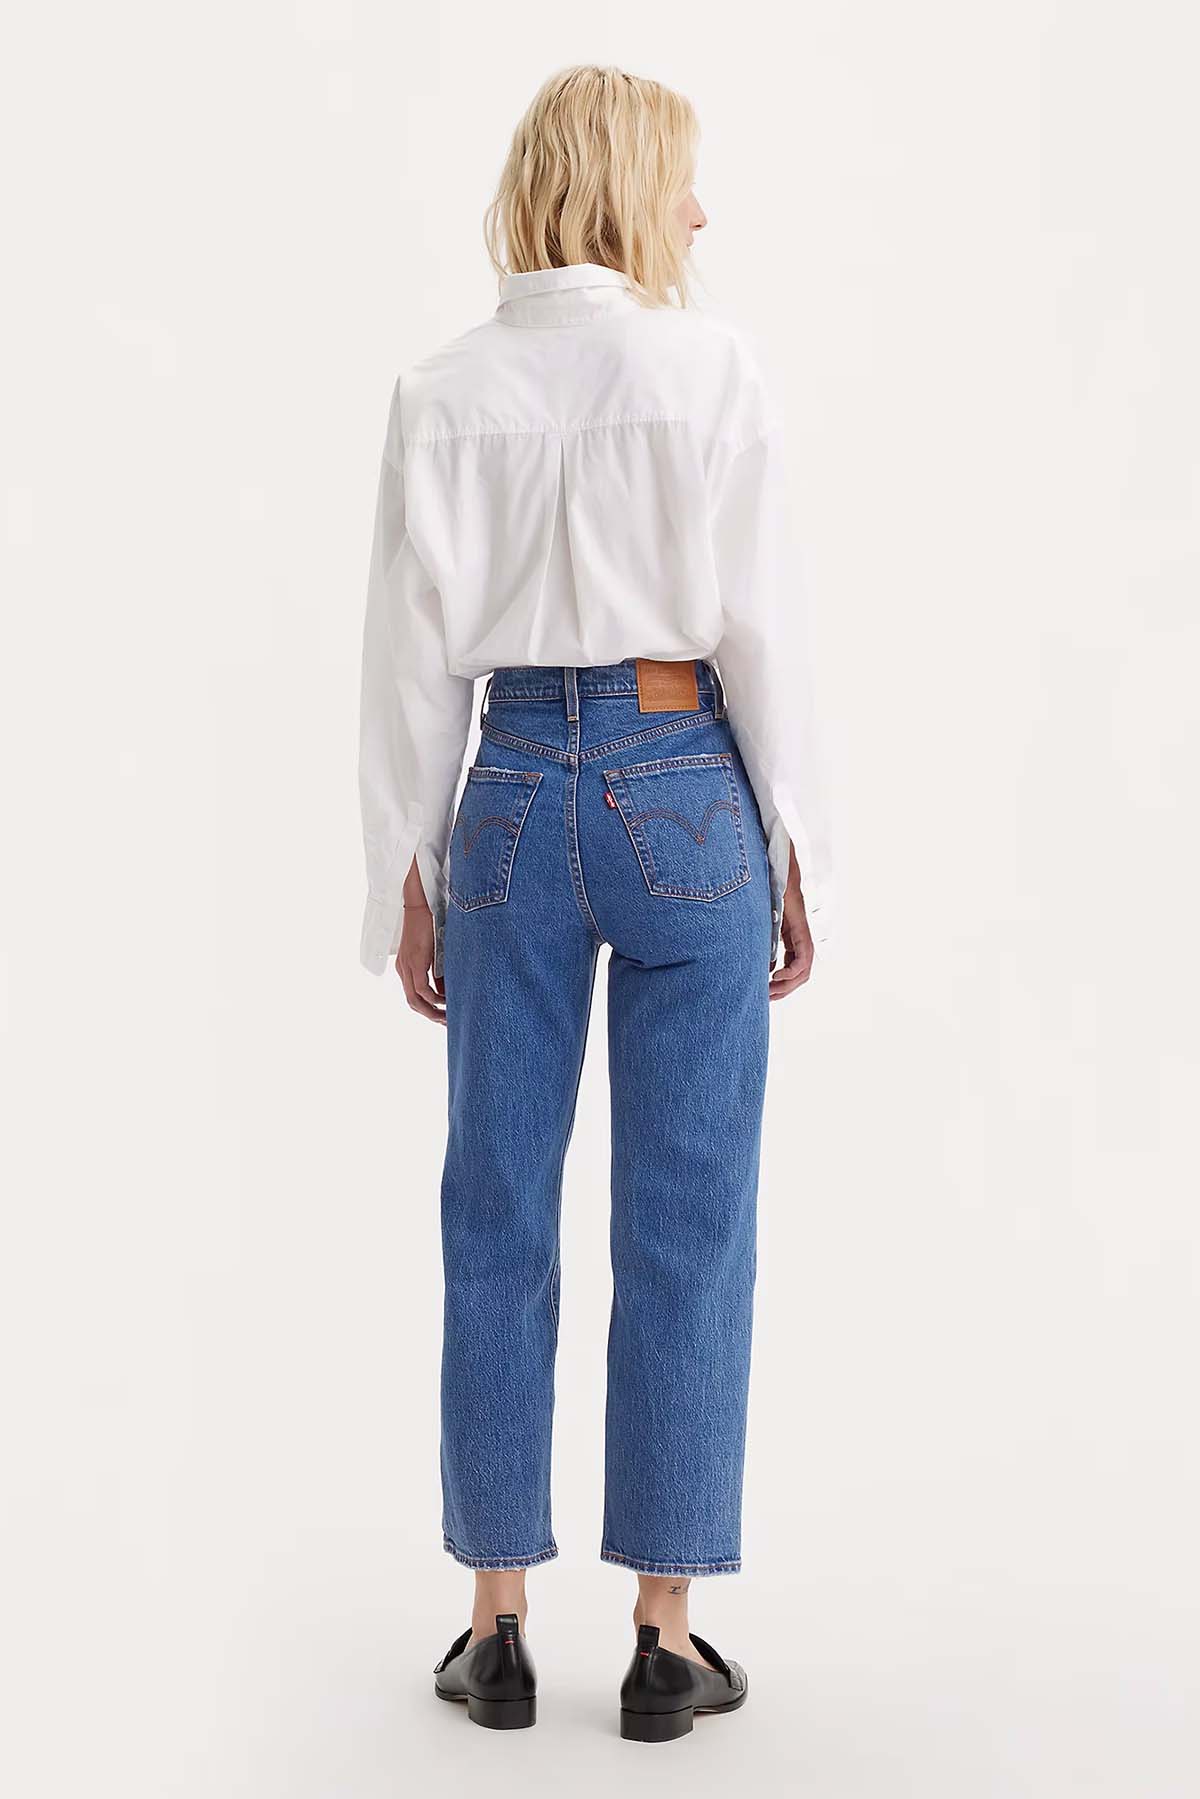 Levis - Ribcage Straight Ankle - Jazz Pop - Back